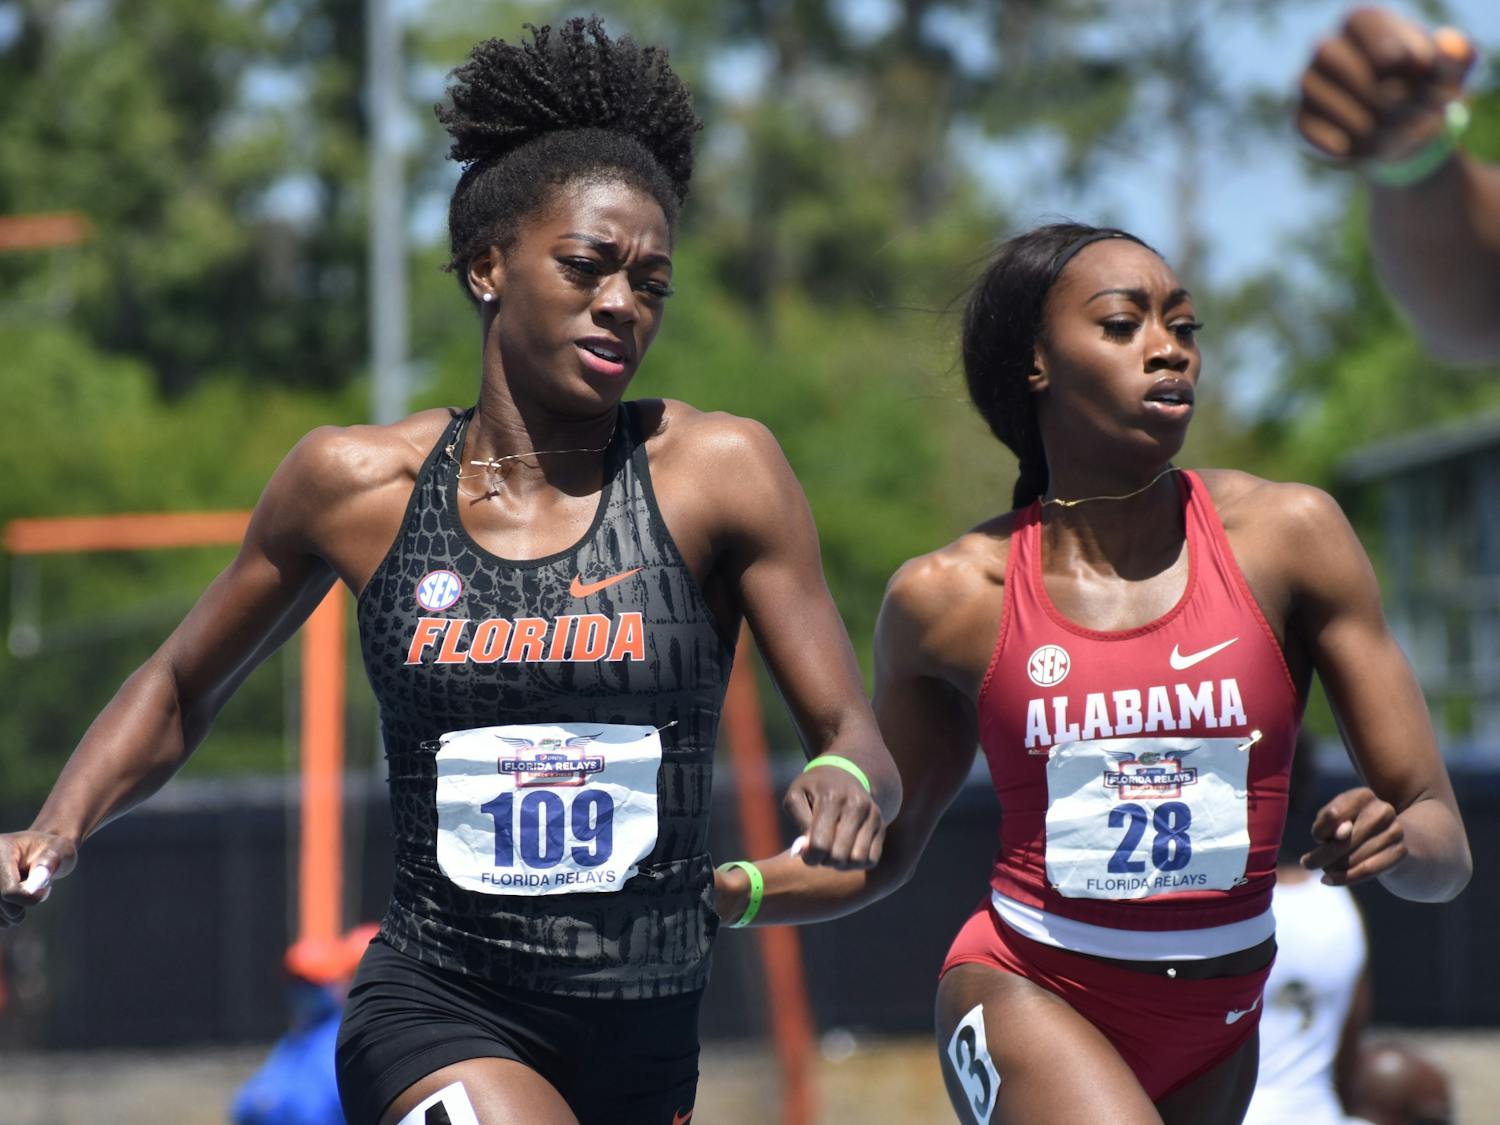 Florida picked up right where it left off and showed out in both short and long distance events as well jumps.